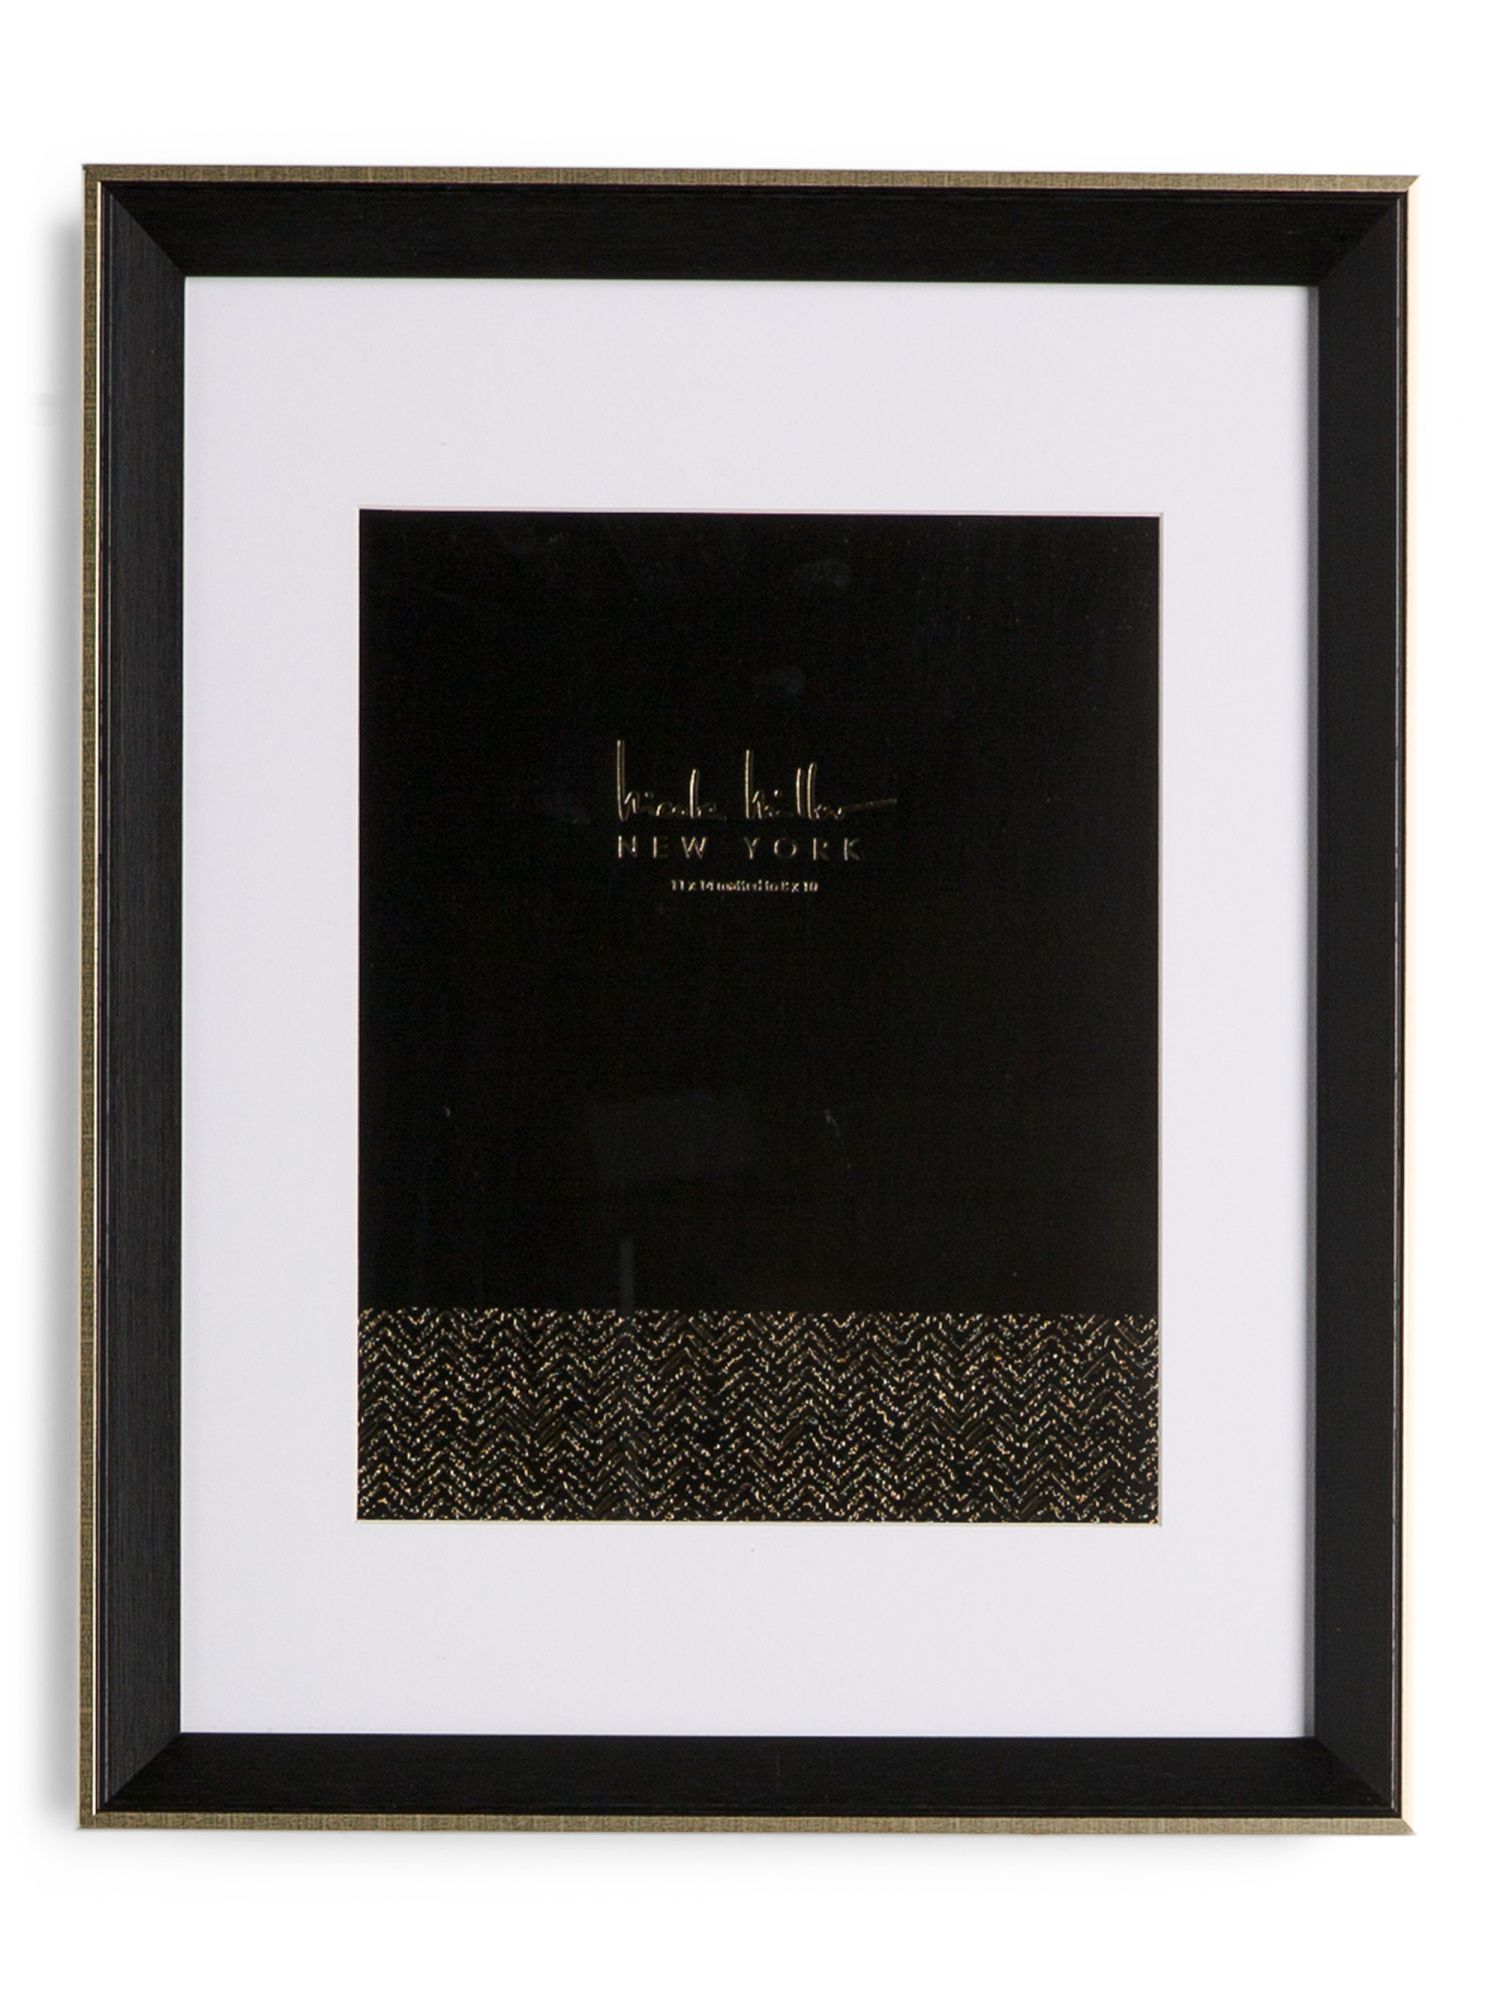 8x10 Matted Gold Tone Accented Picture Frame | TJ Maxx